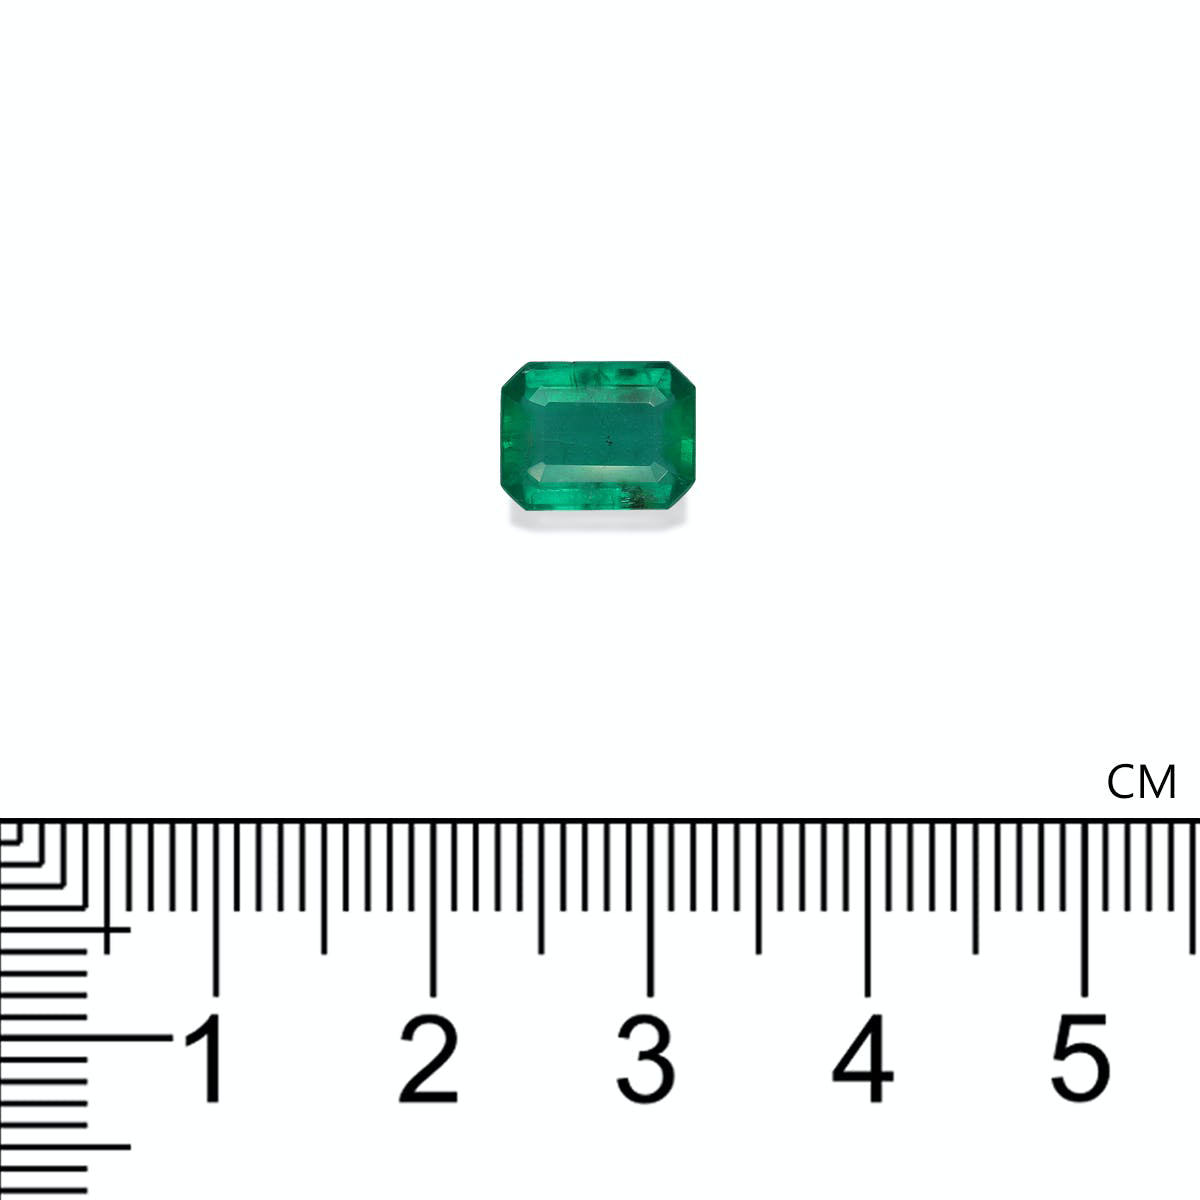 Picture of Green Zambian Emerald 1.76ct - 9x7mm (PG0228)